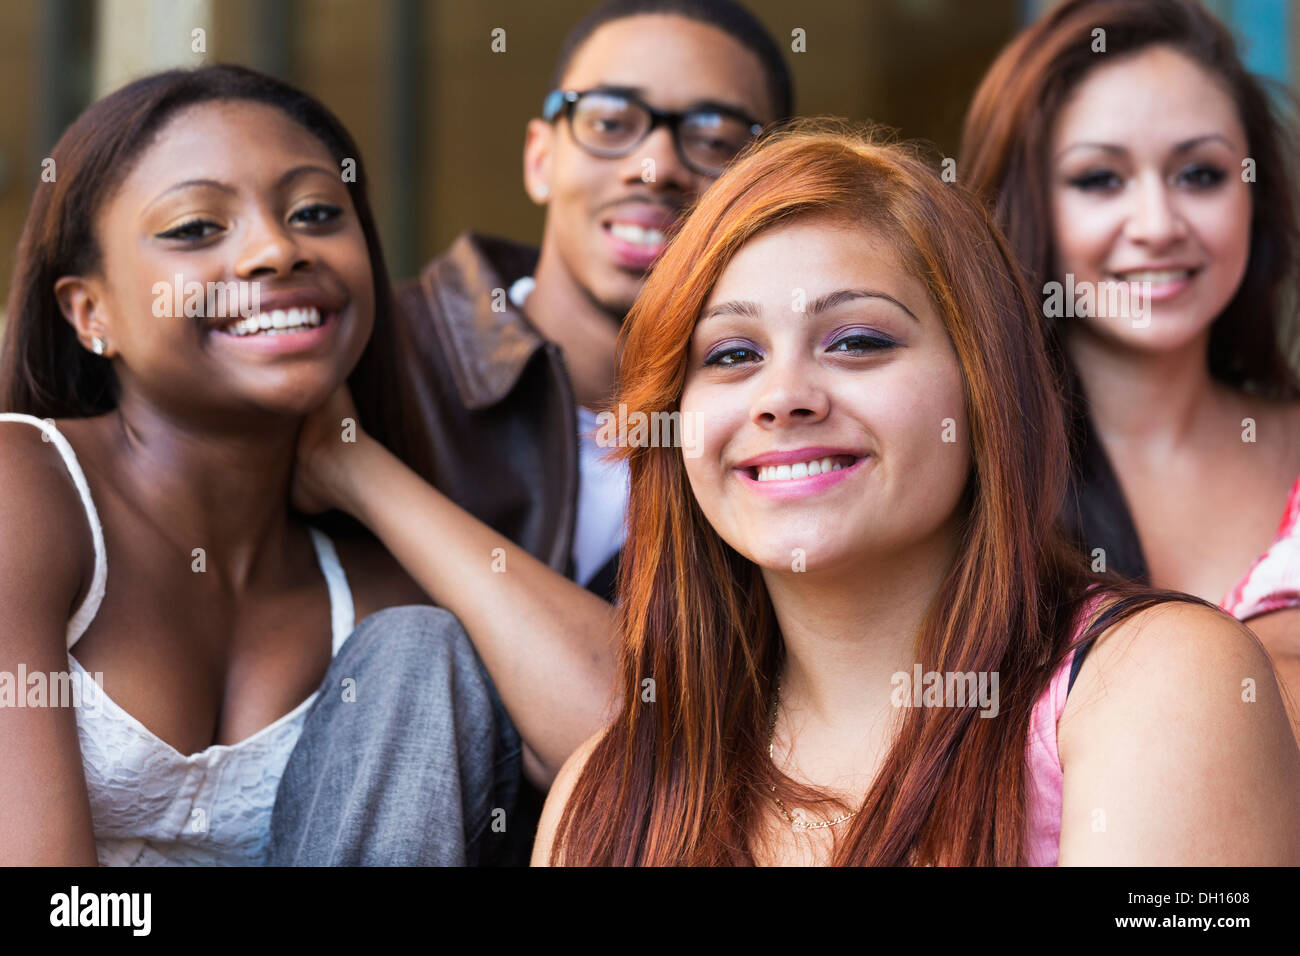 Teenagers smiling outdoors Stock Photo